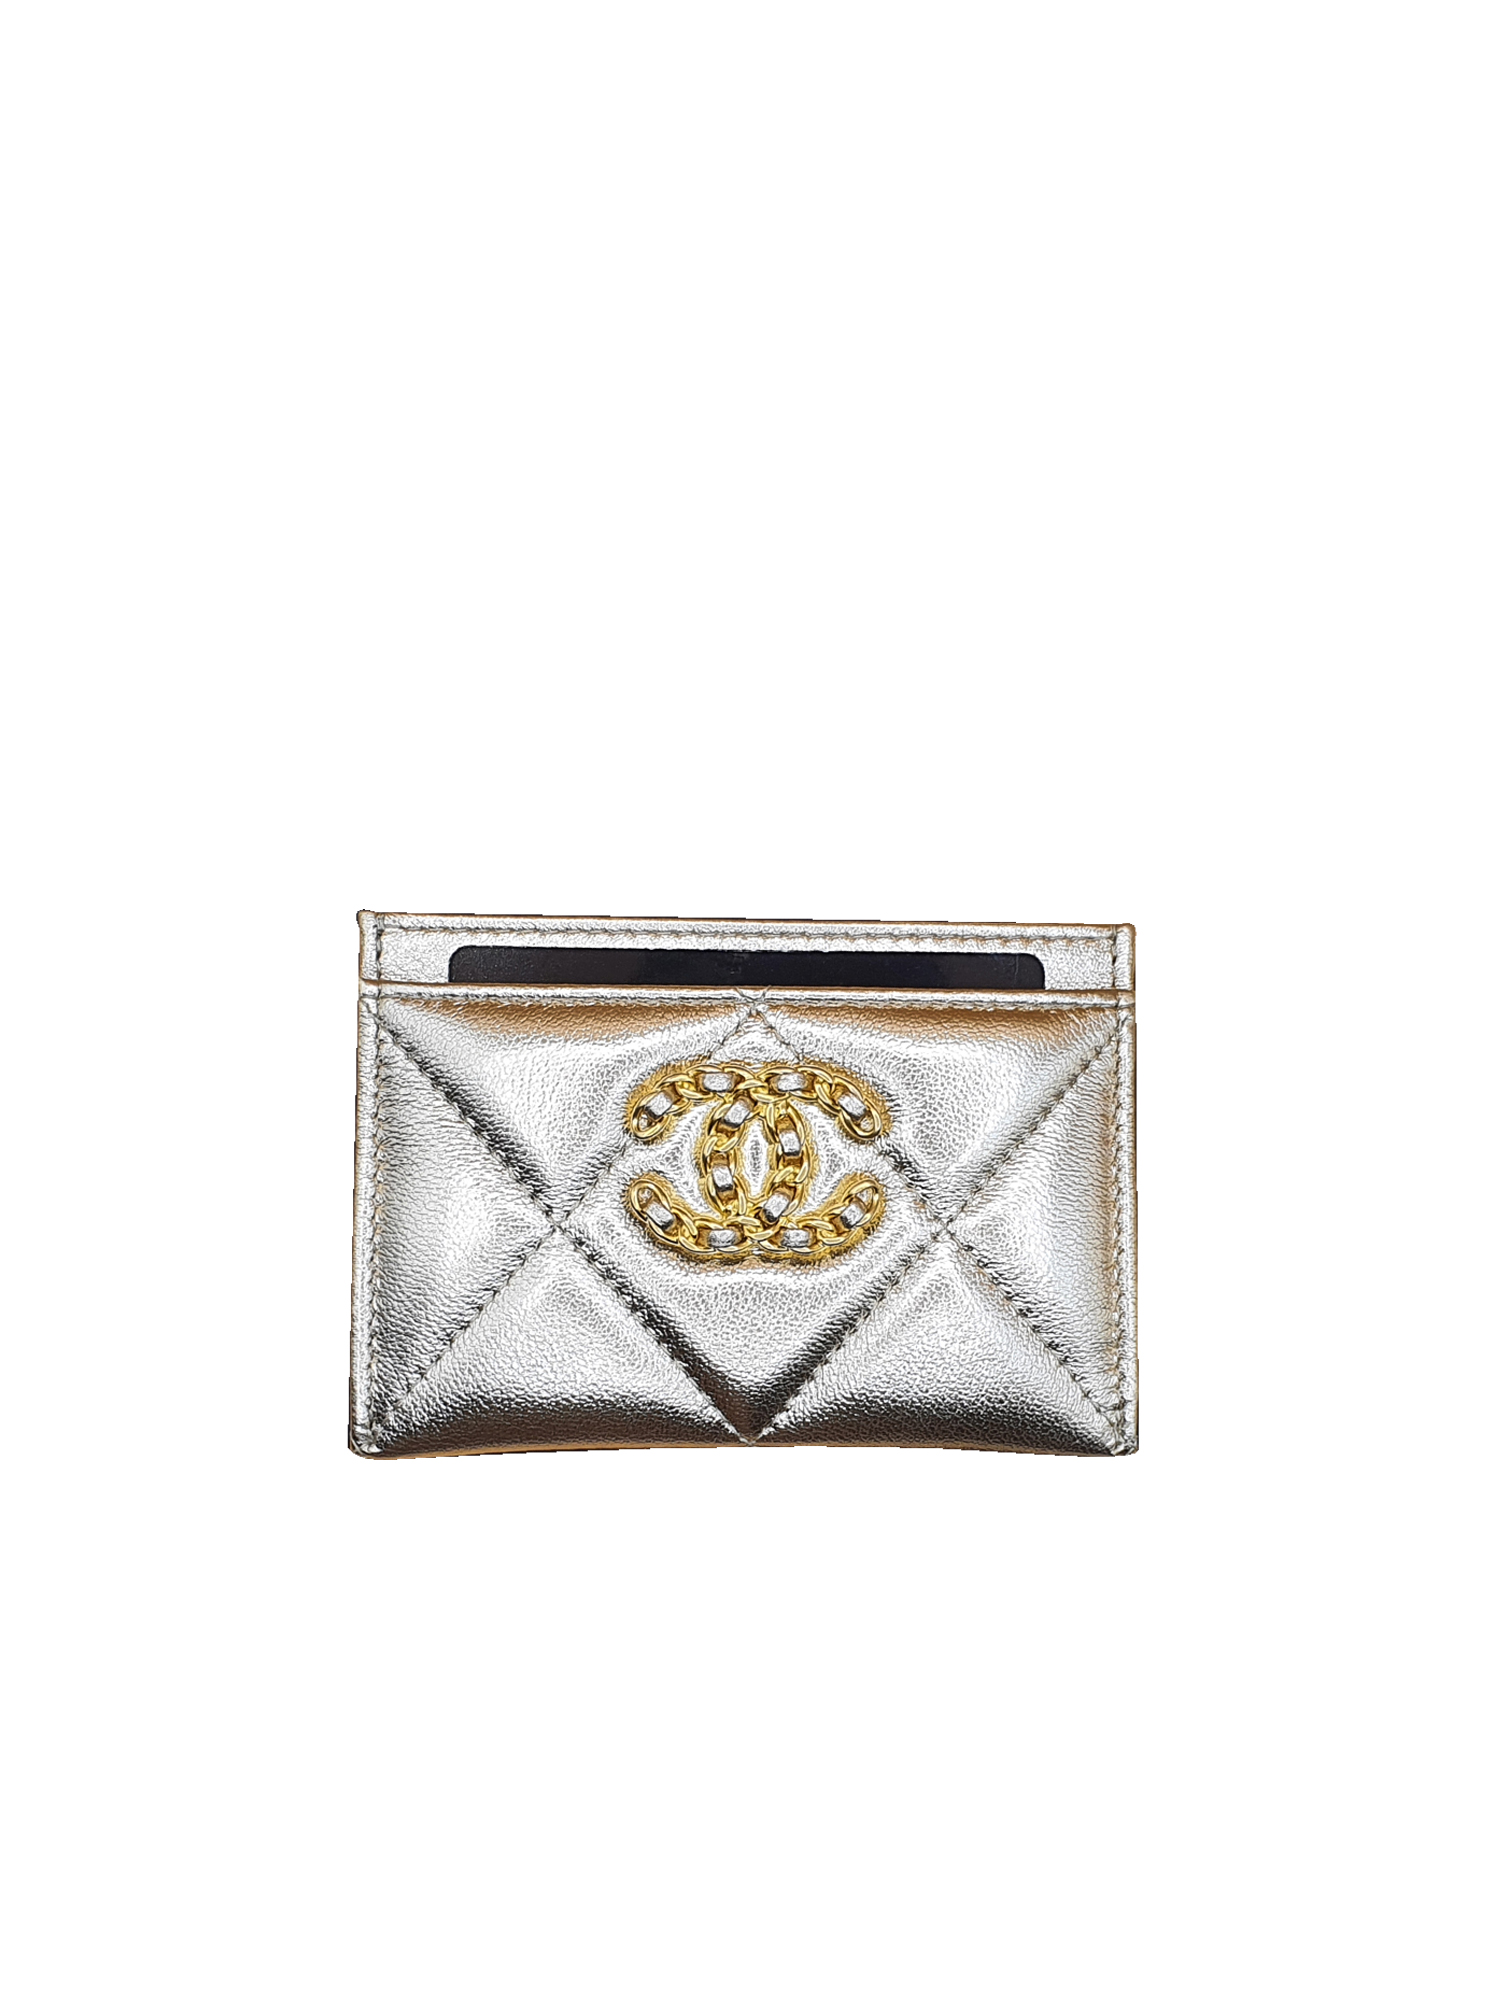 Chanel Classic Flap Card Holder Black Caviar Silver Hardware  Coco  Approved Studio